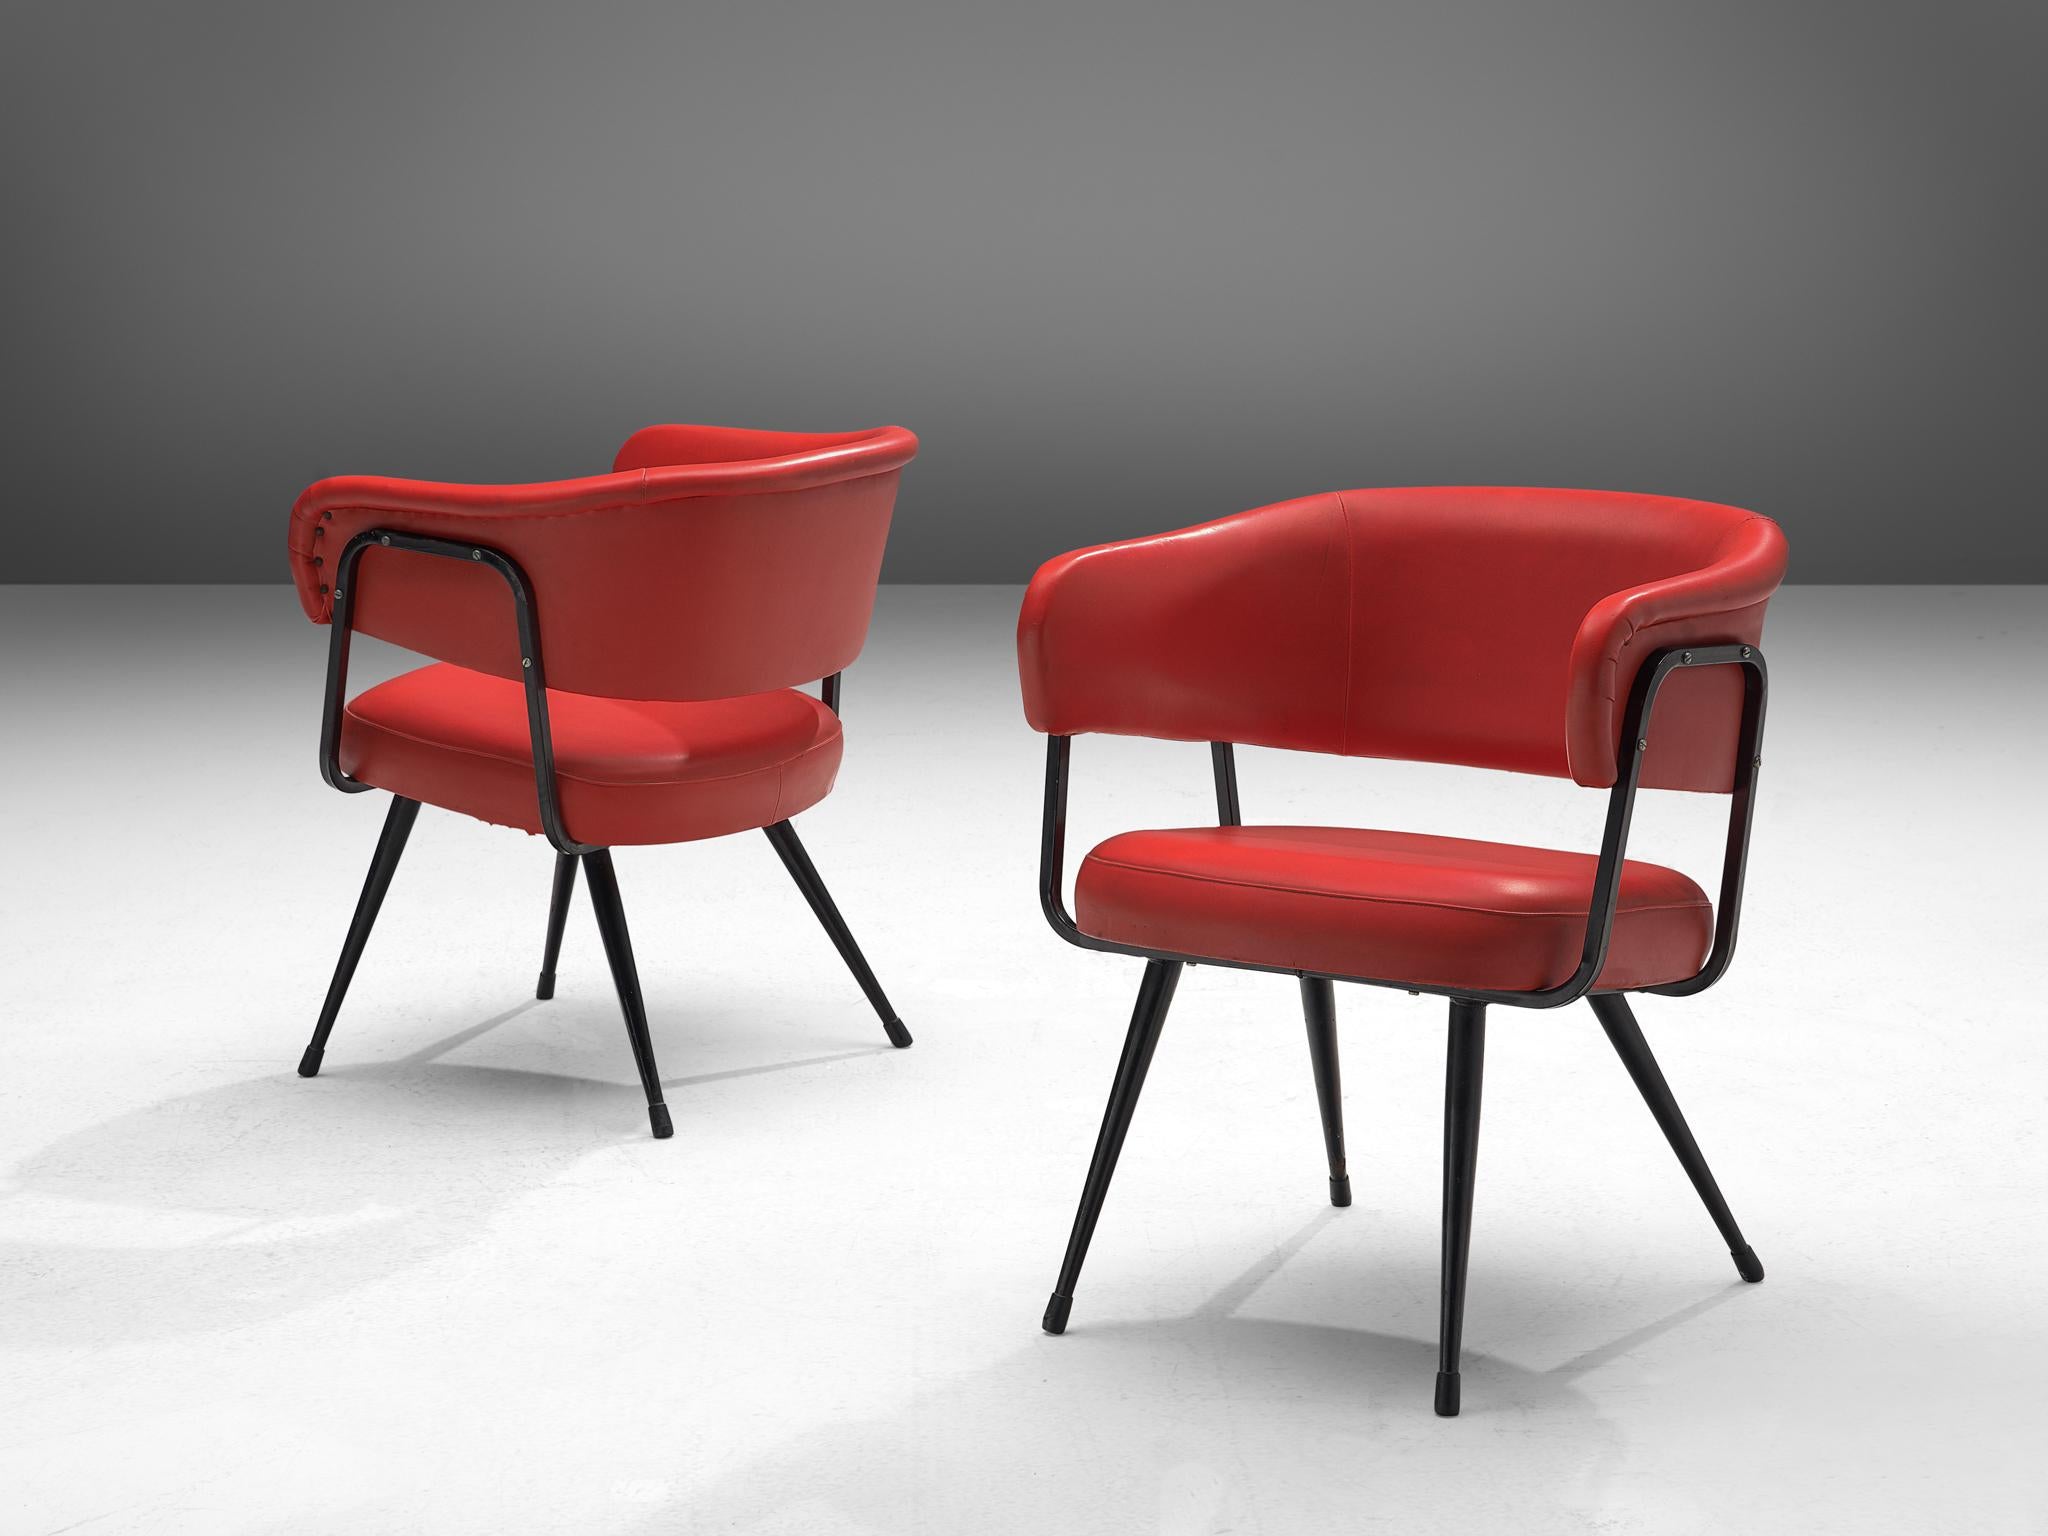 Dining chairs, leatherette, metal, Italy, 1970s

This set of dining chairs features a red seat combined with a black lacquered steel frame. The backrests are curved and surround the sitter, creating a comfortable and embracing feeling. The black